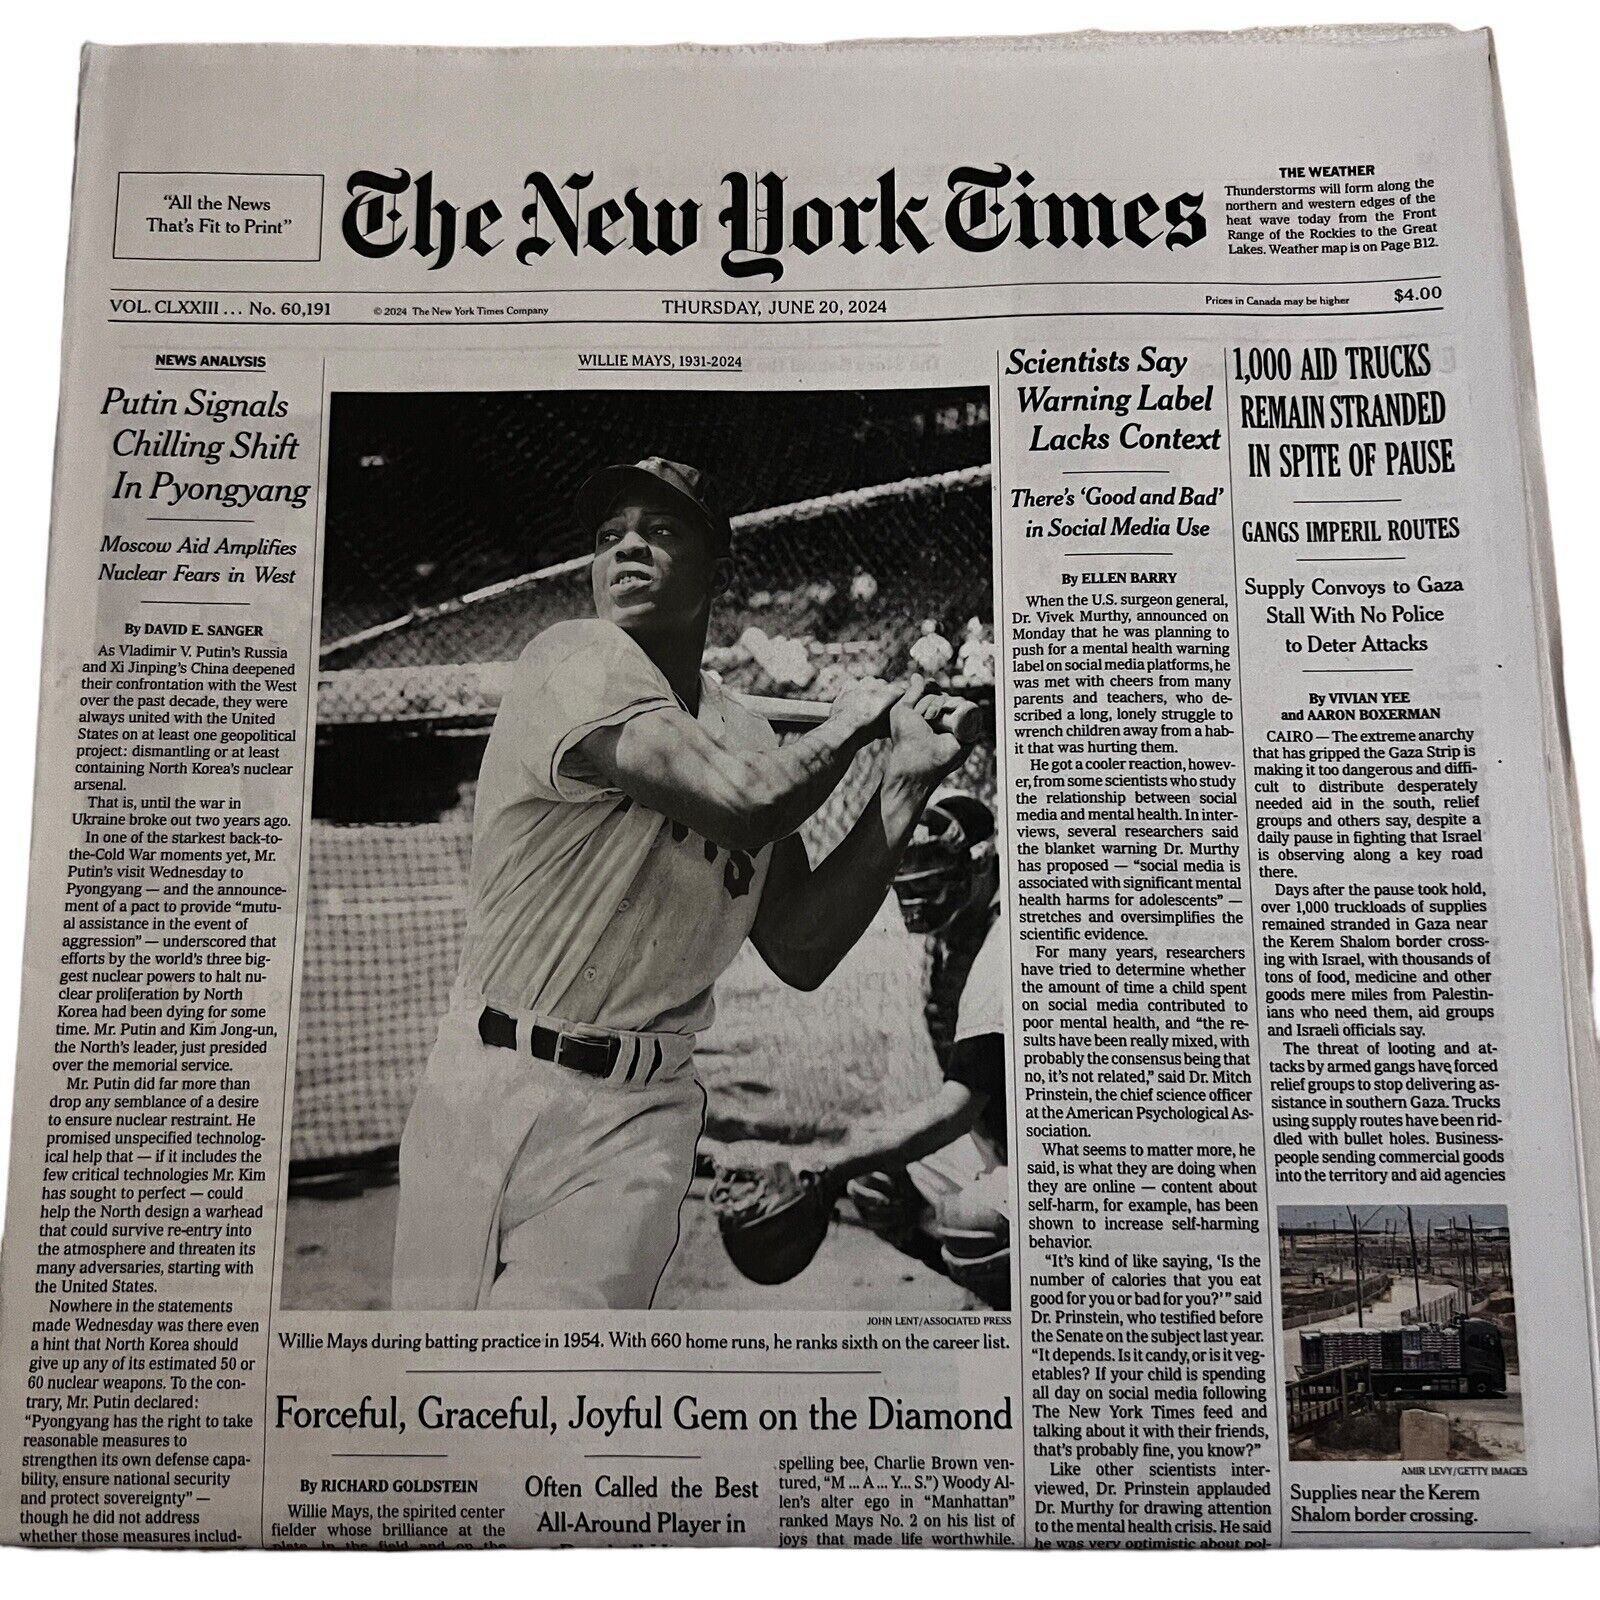 The New York Times Paper June 20 2024 WILLIE MAYS 1931-2024 -- 600 Home Runs NYT